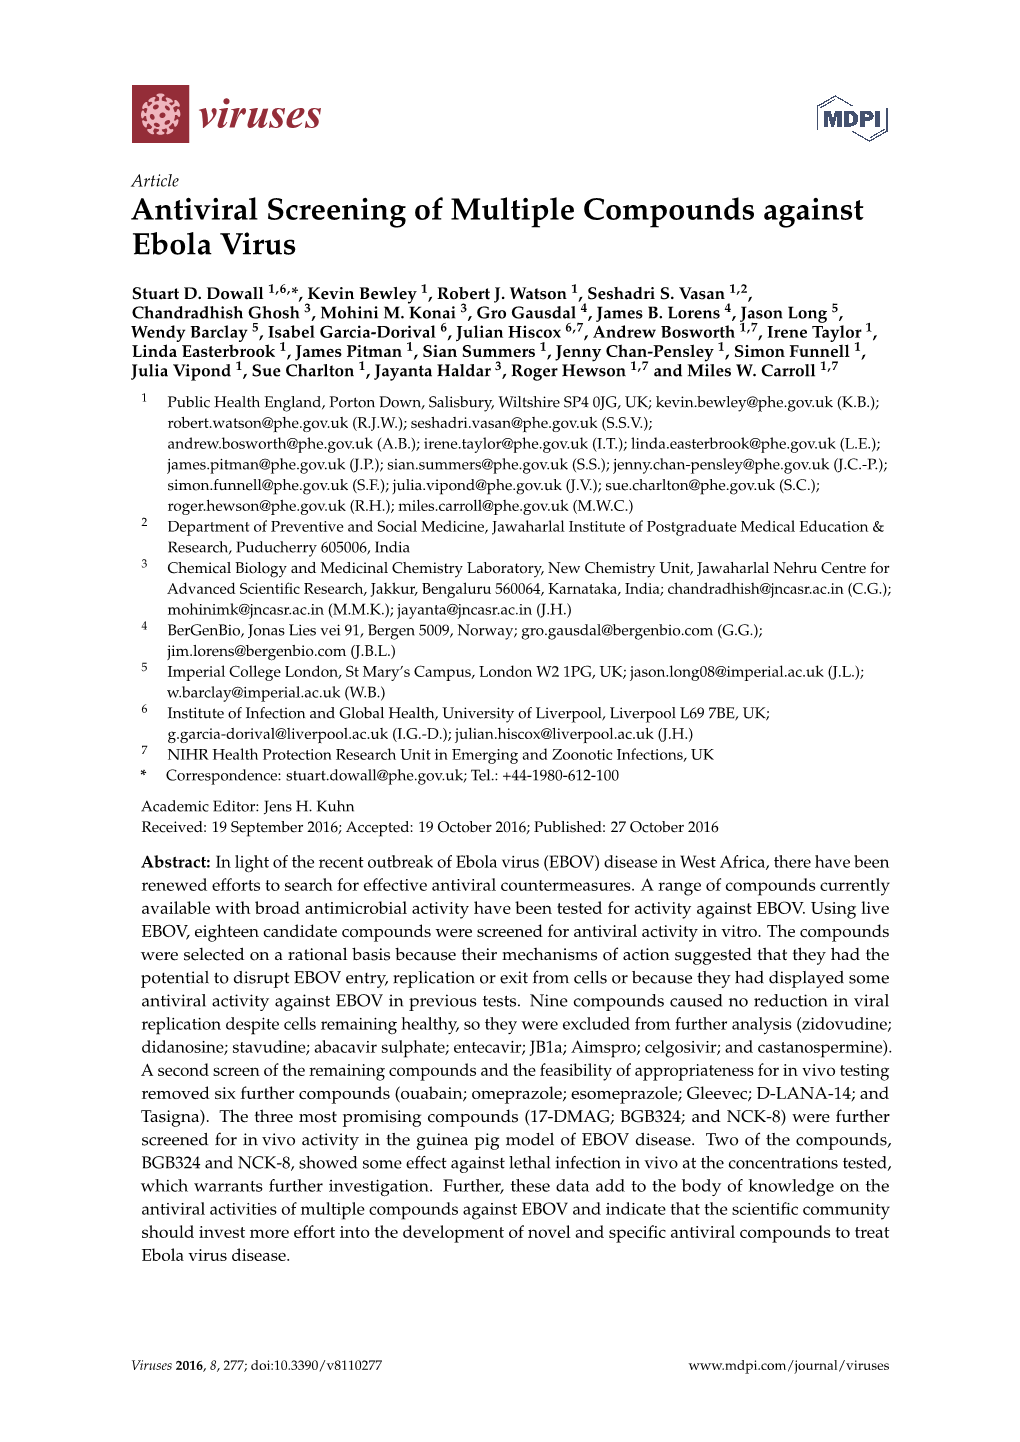 Antiviral Screening of Multiple Compounds Against Ebola Virus